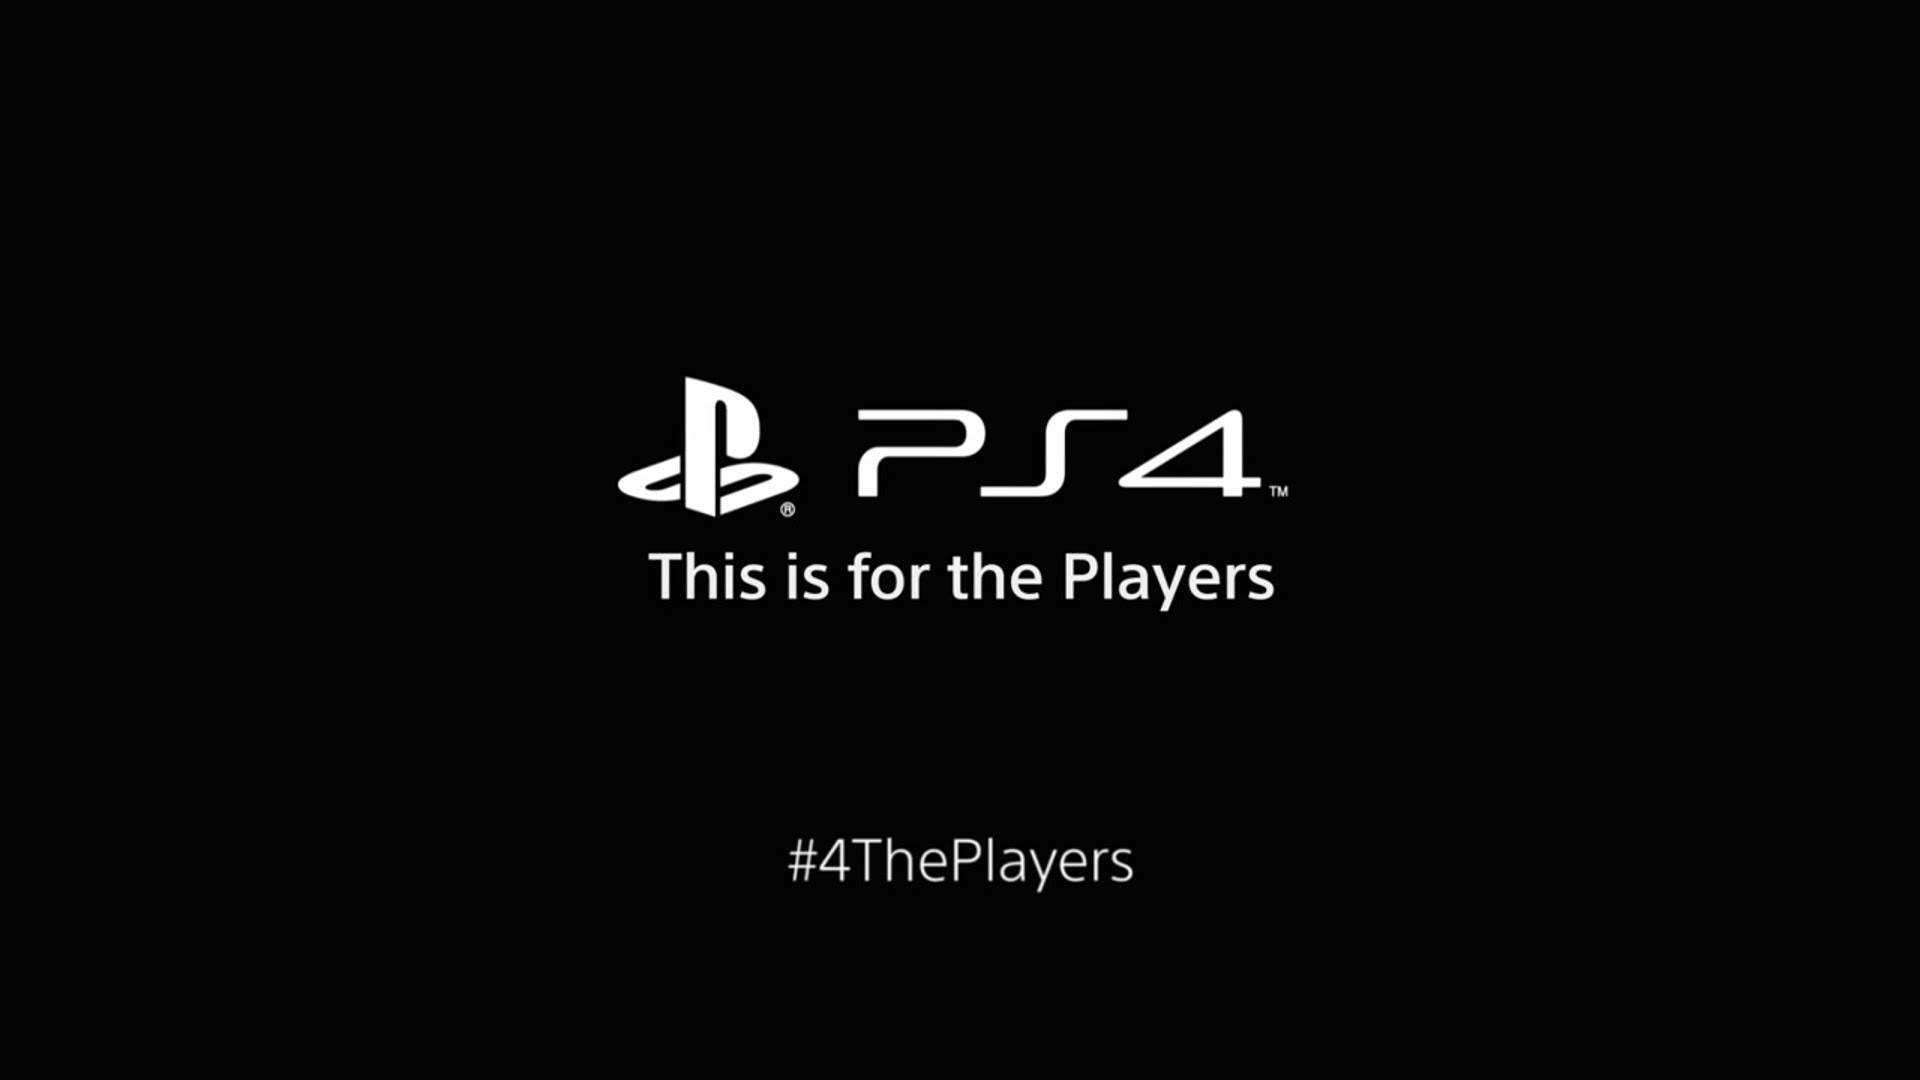 For the Players